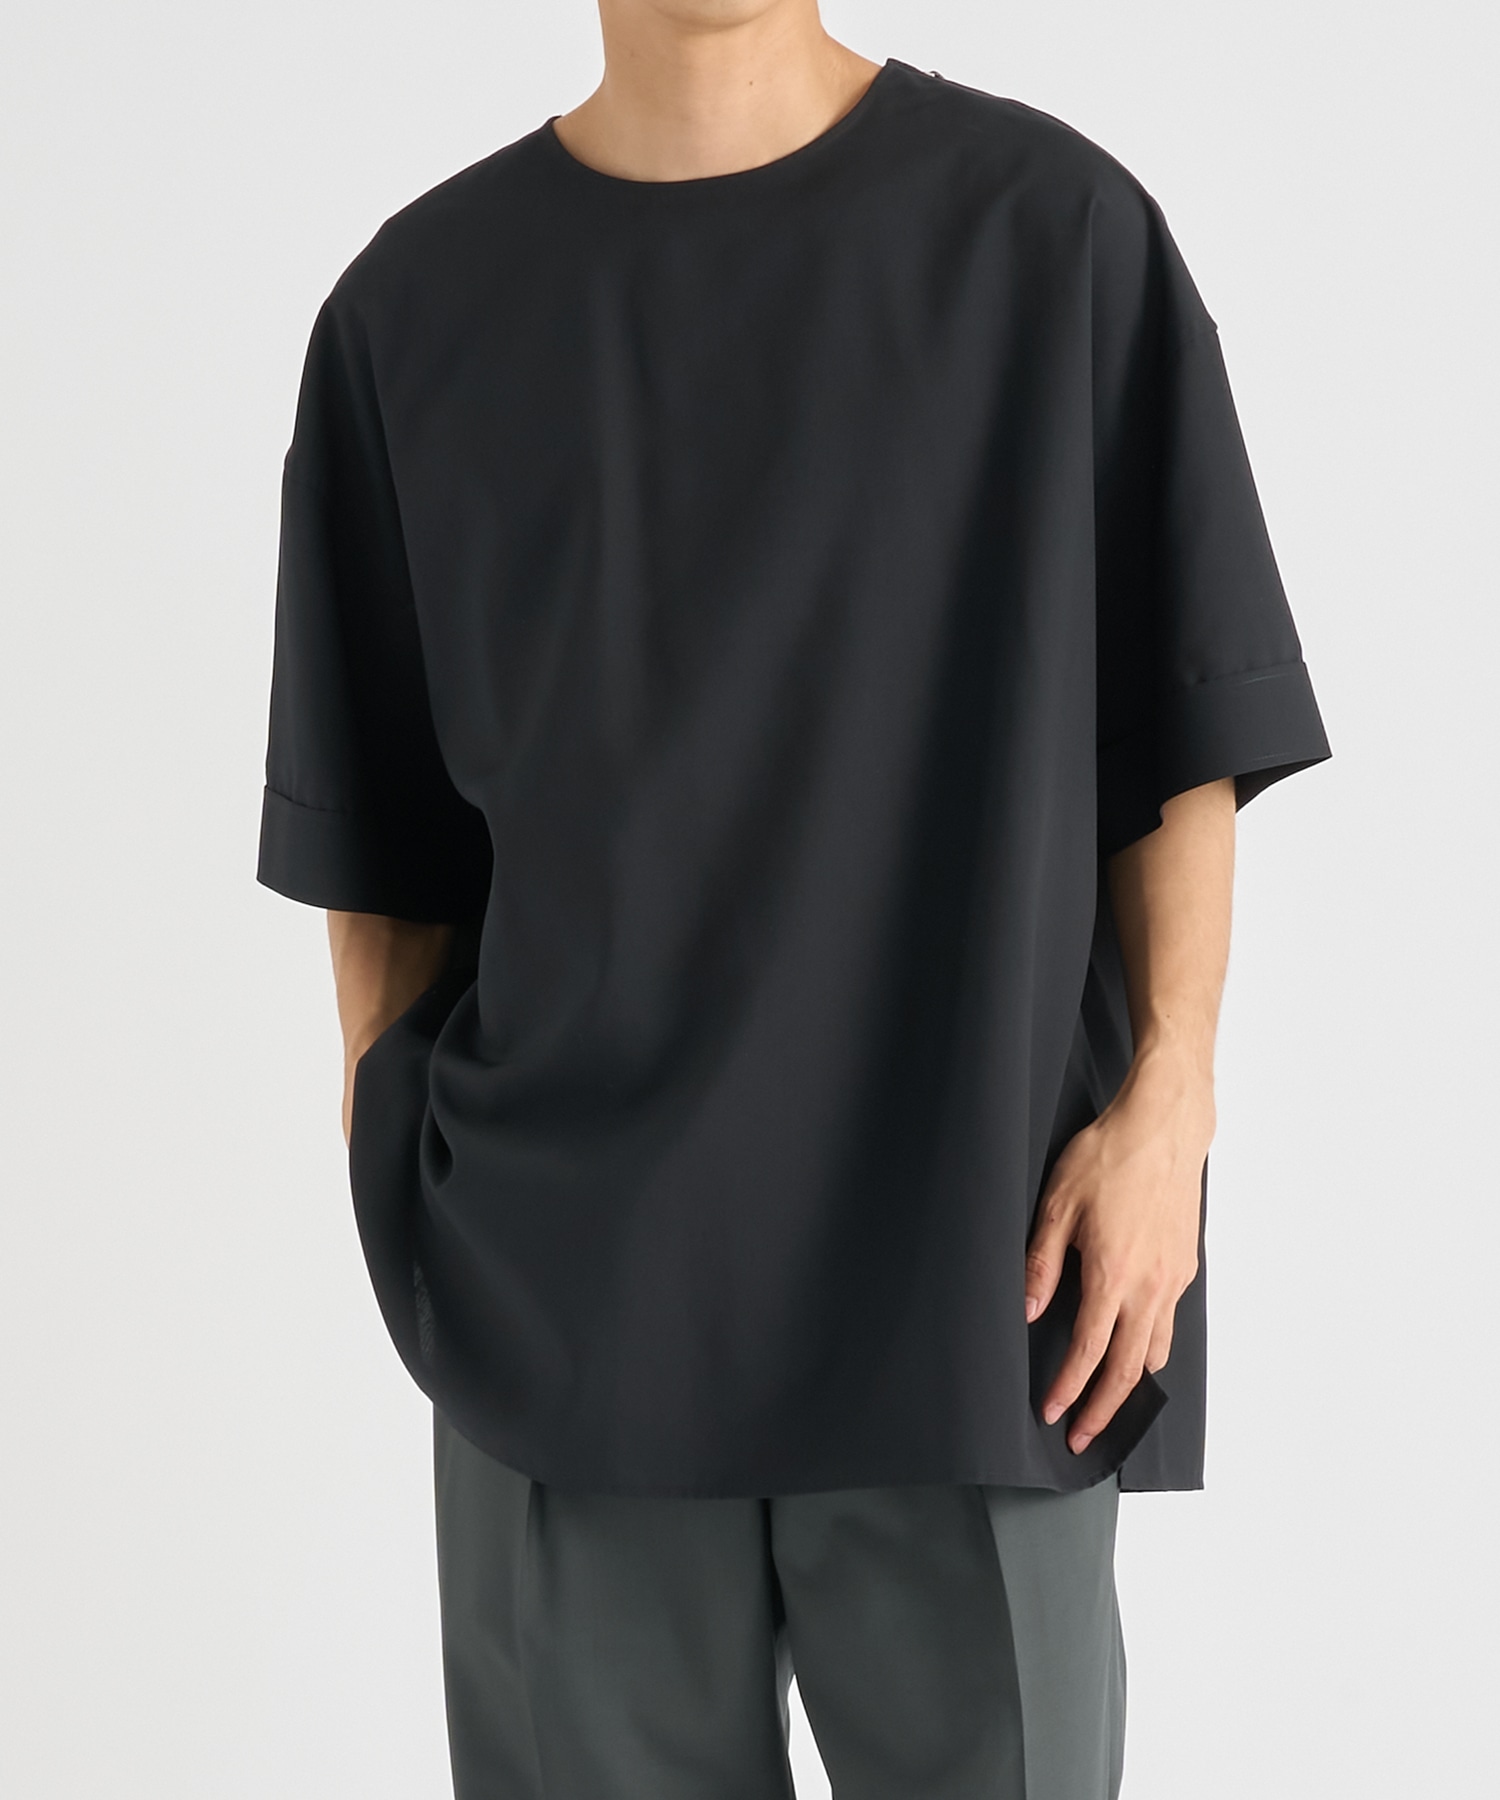 THE SIDE ZIP PO SHIRT S/S